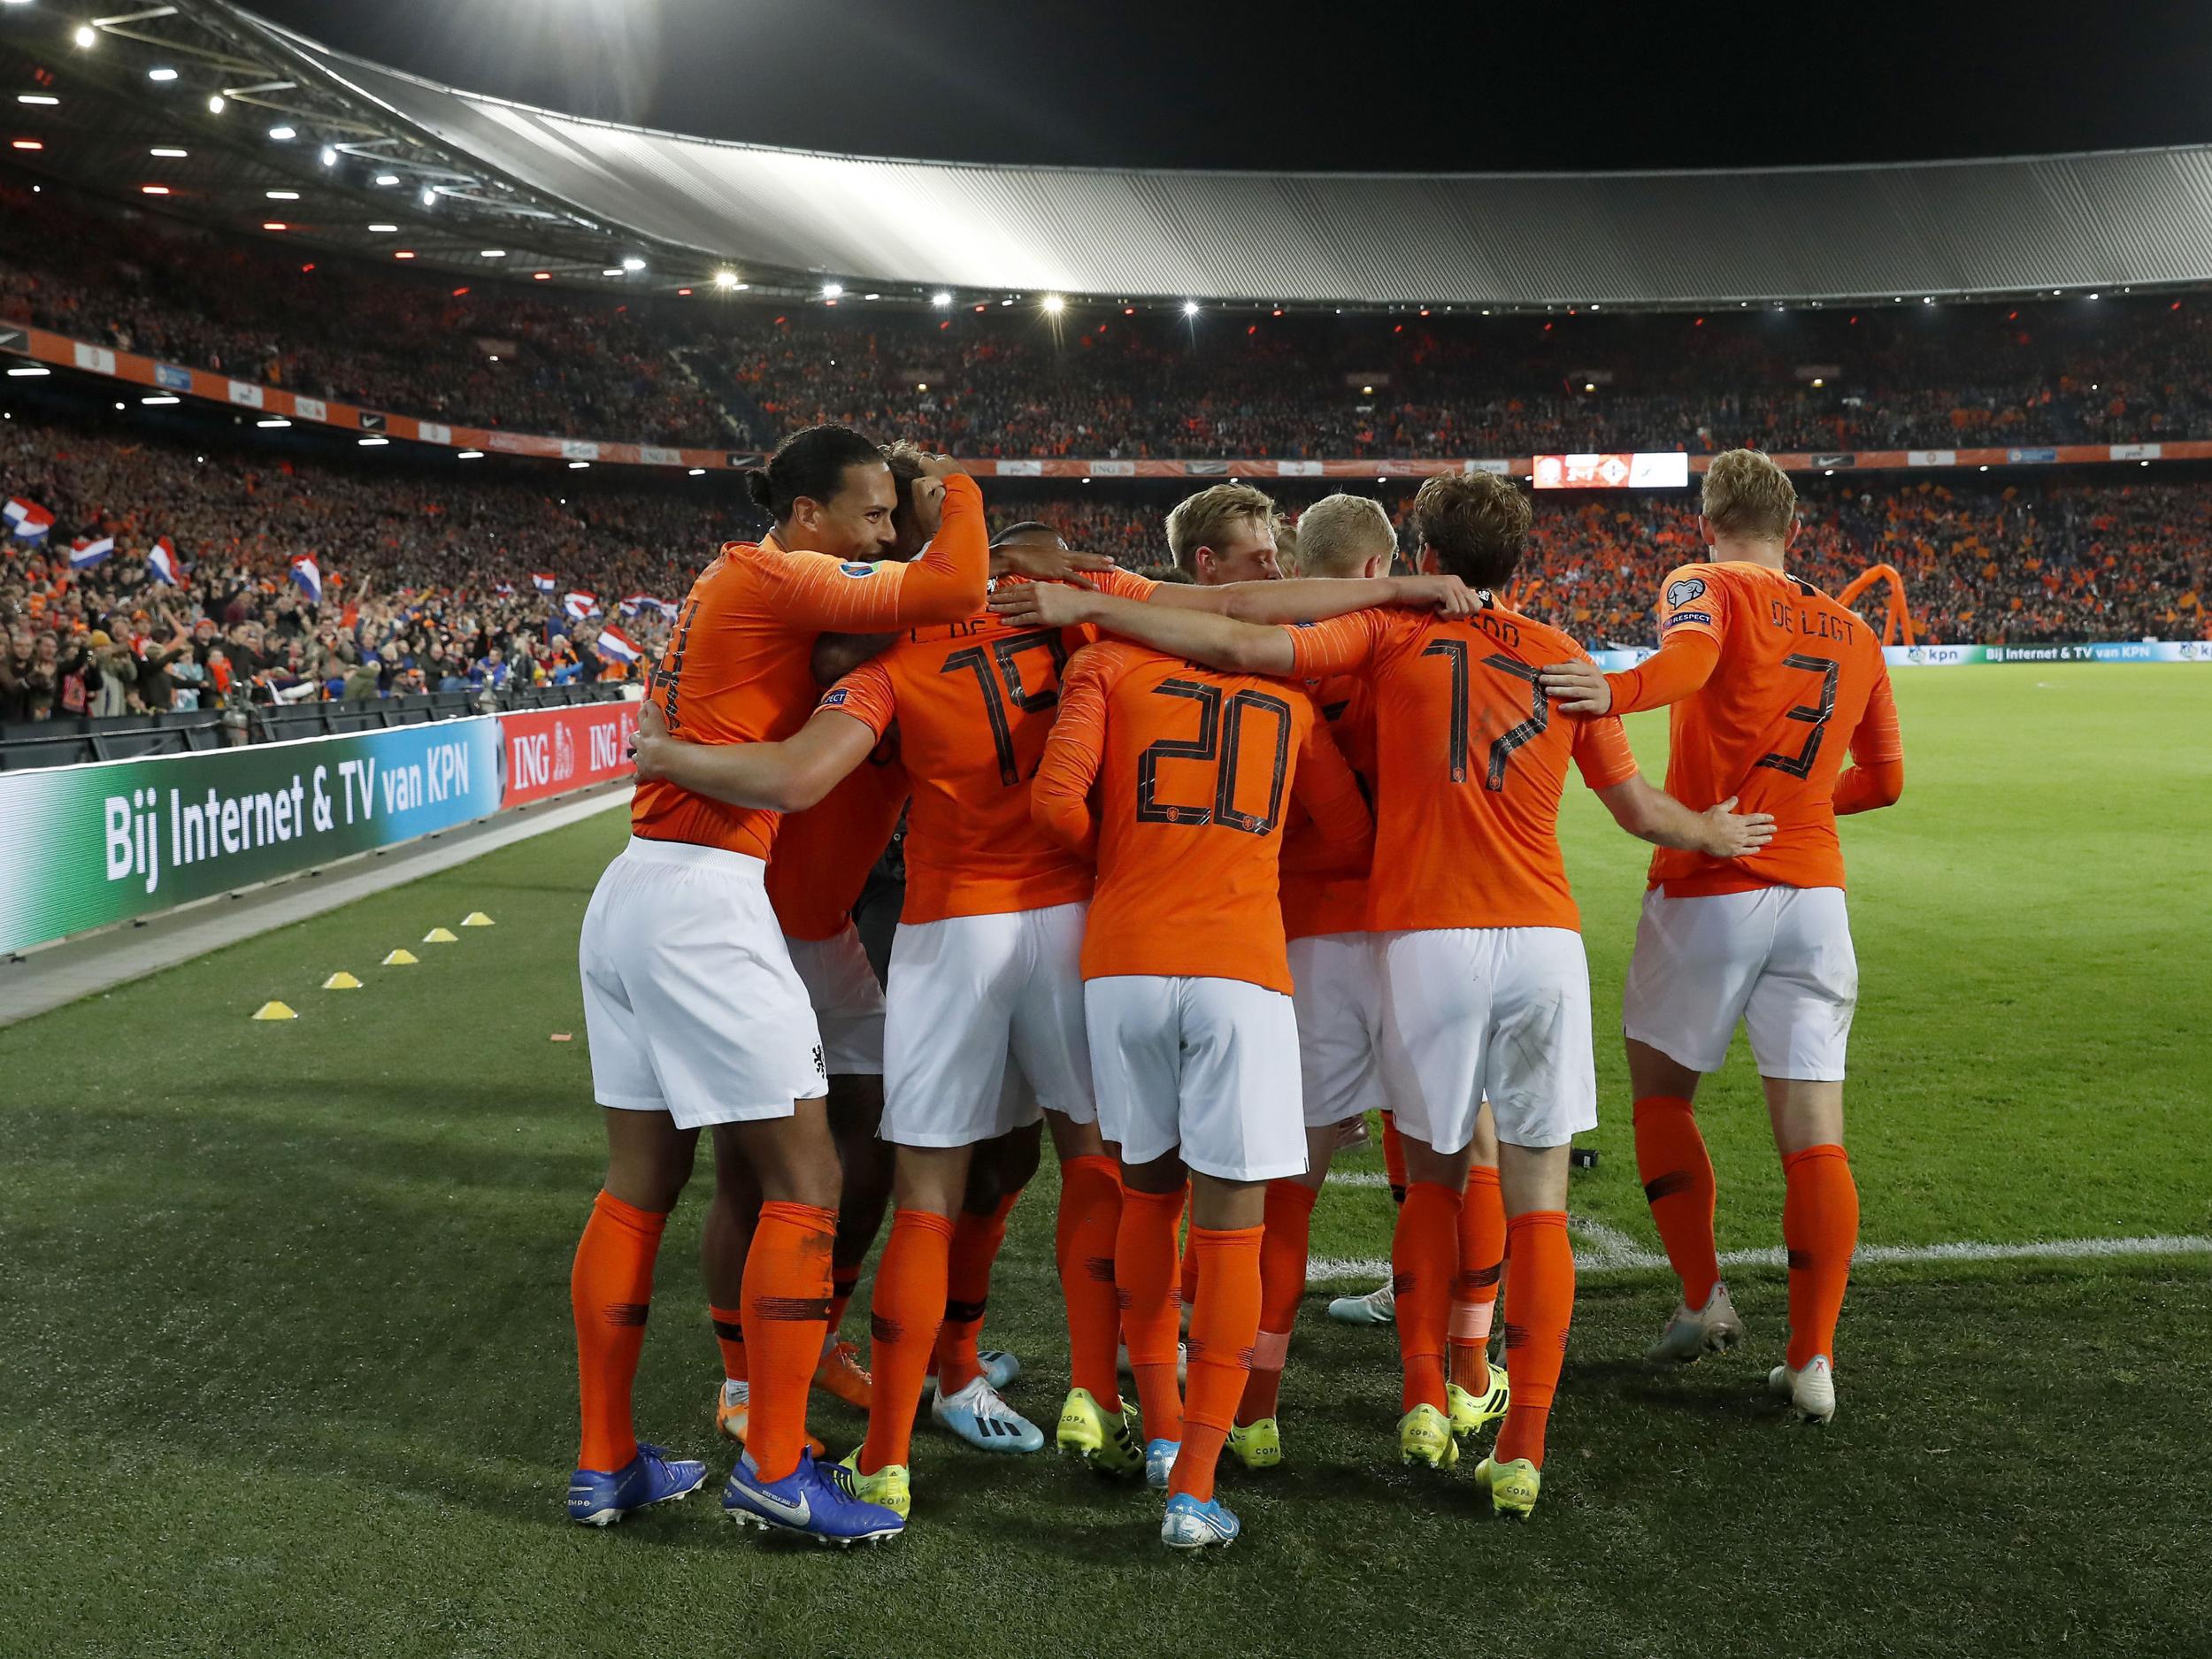 Three late goals secured the Netherlands victory over Northern Ireland